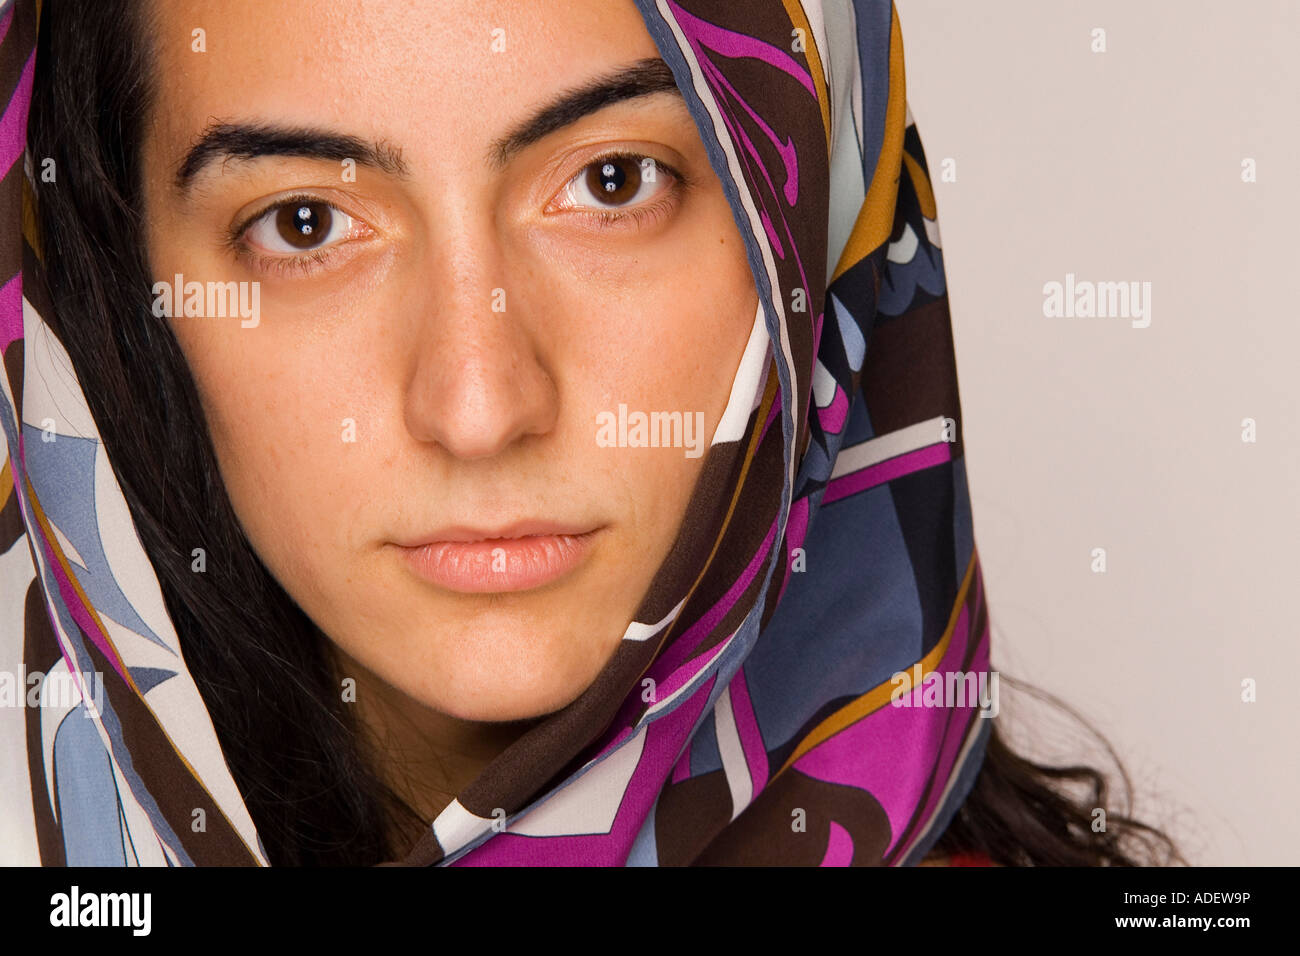 Young serious middle-eastern woman wearing head scarf. Stock Photo